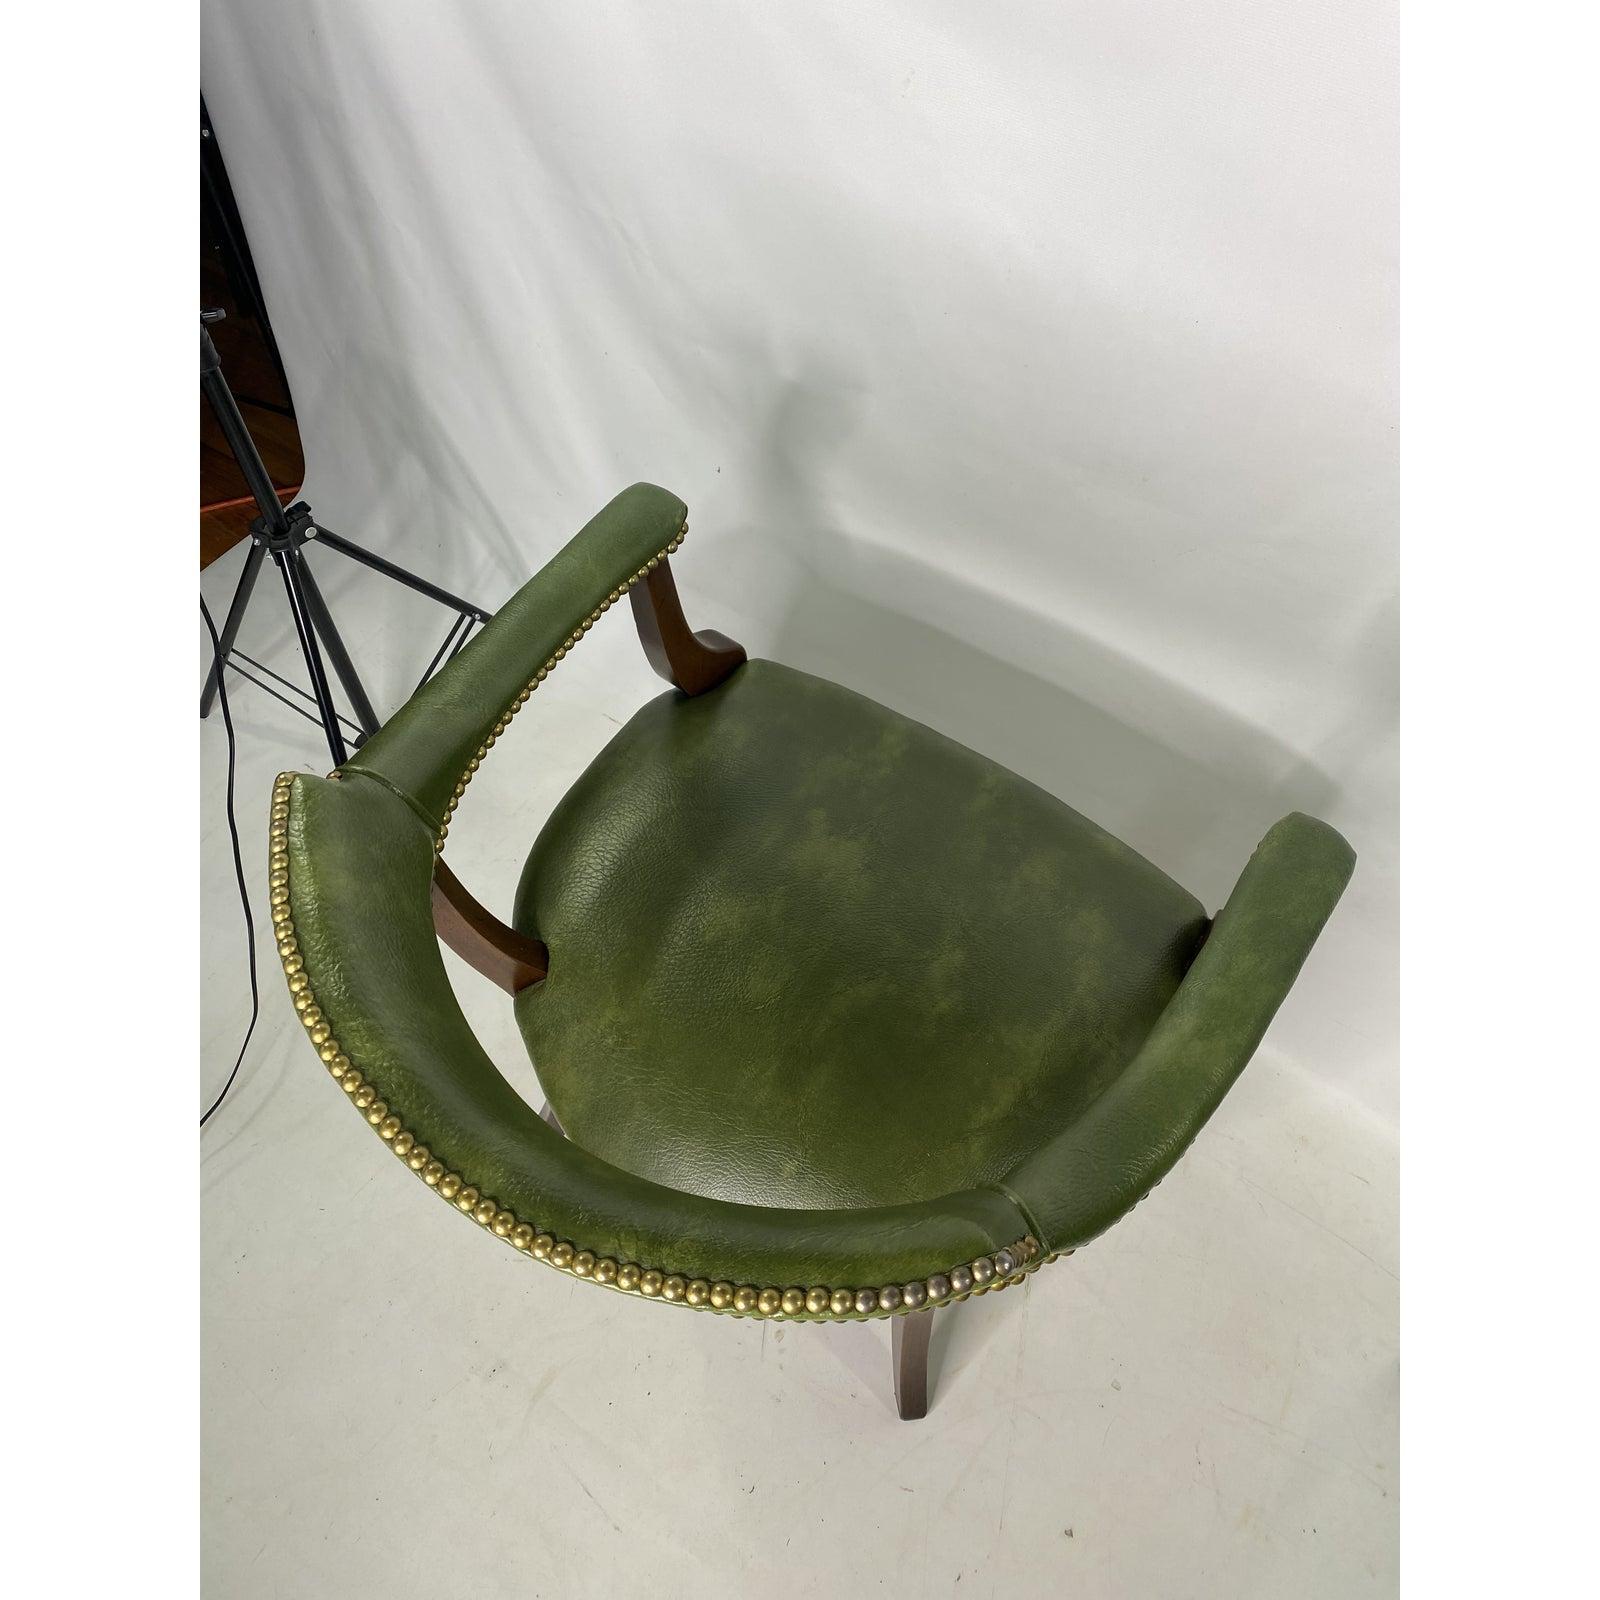 vintage hickory chair furniture